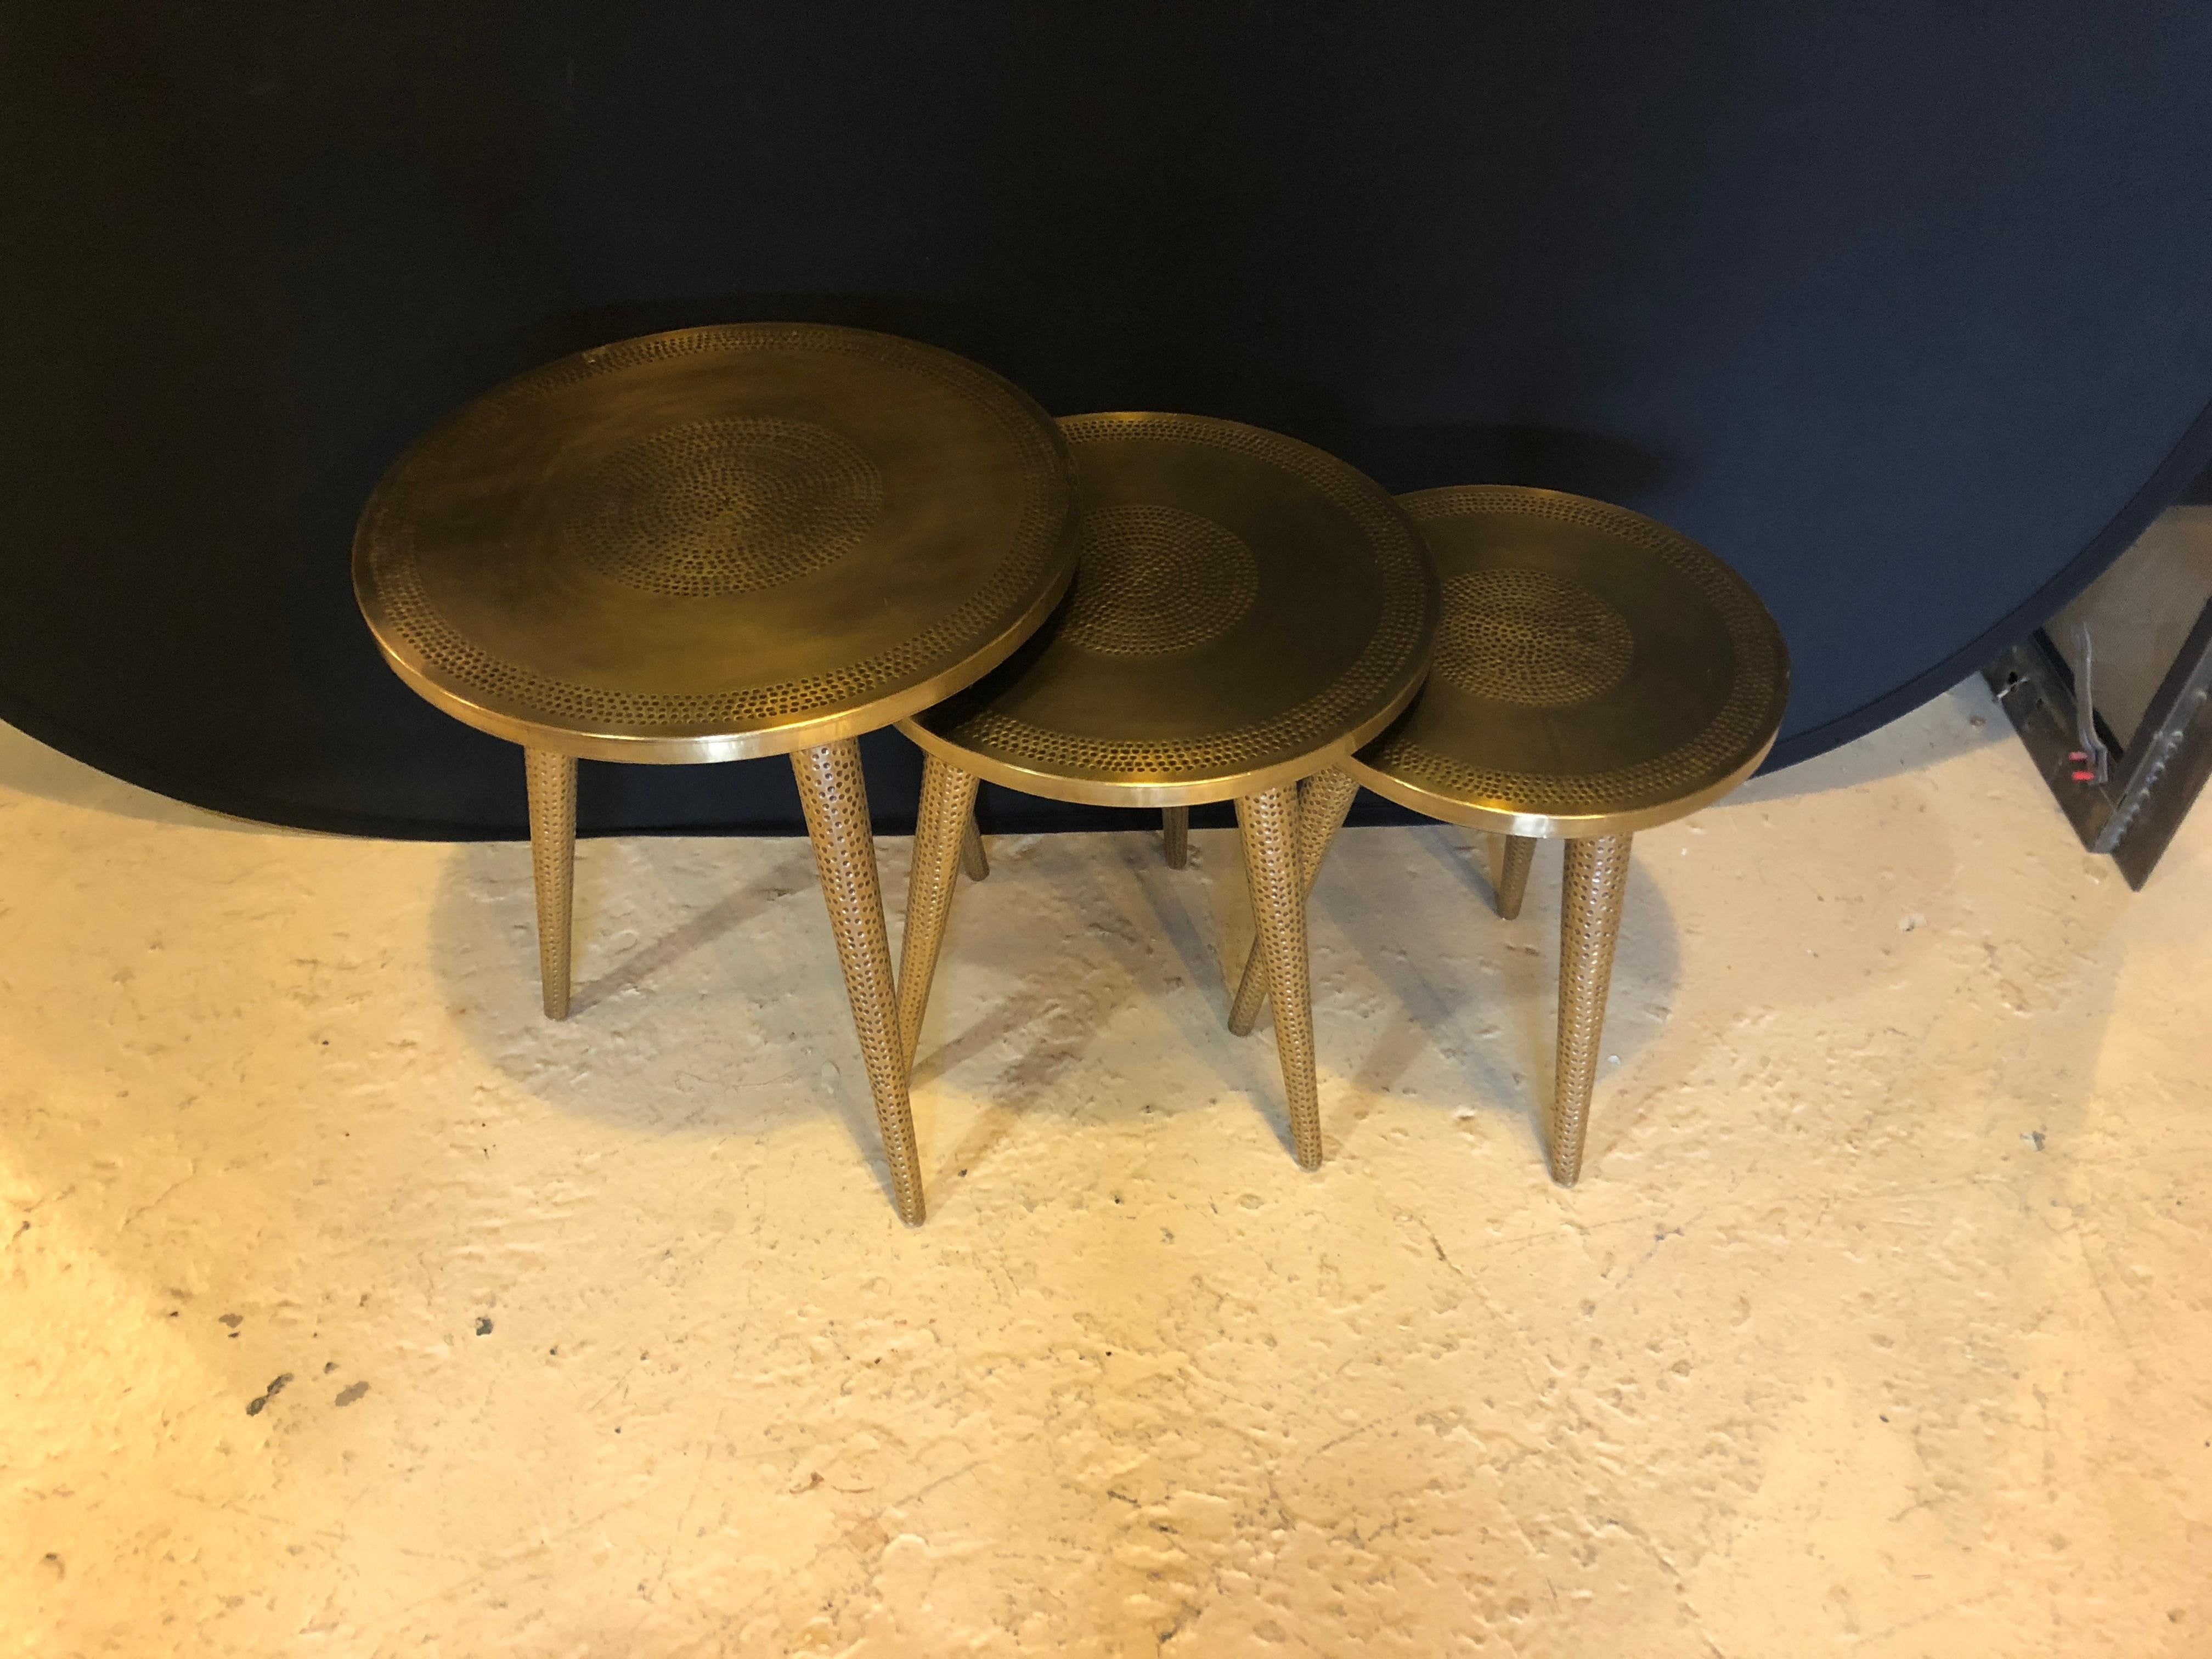 Nest of Three Mid-Century Modern Style Brass Decorative End or Nest of Tables (Messing)